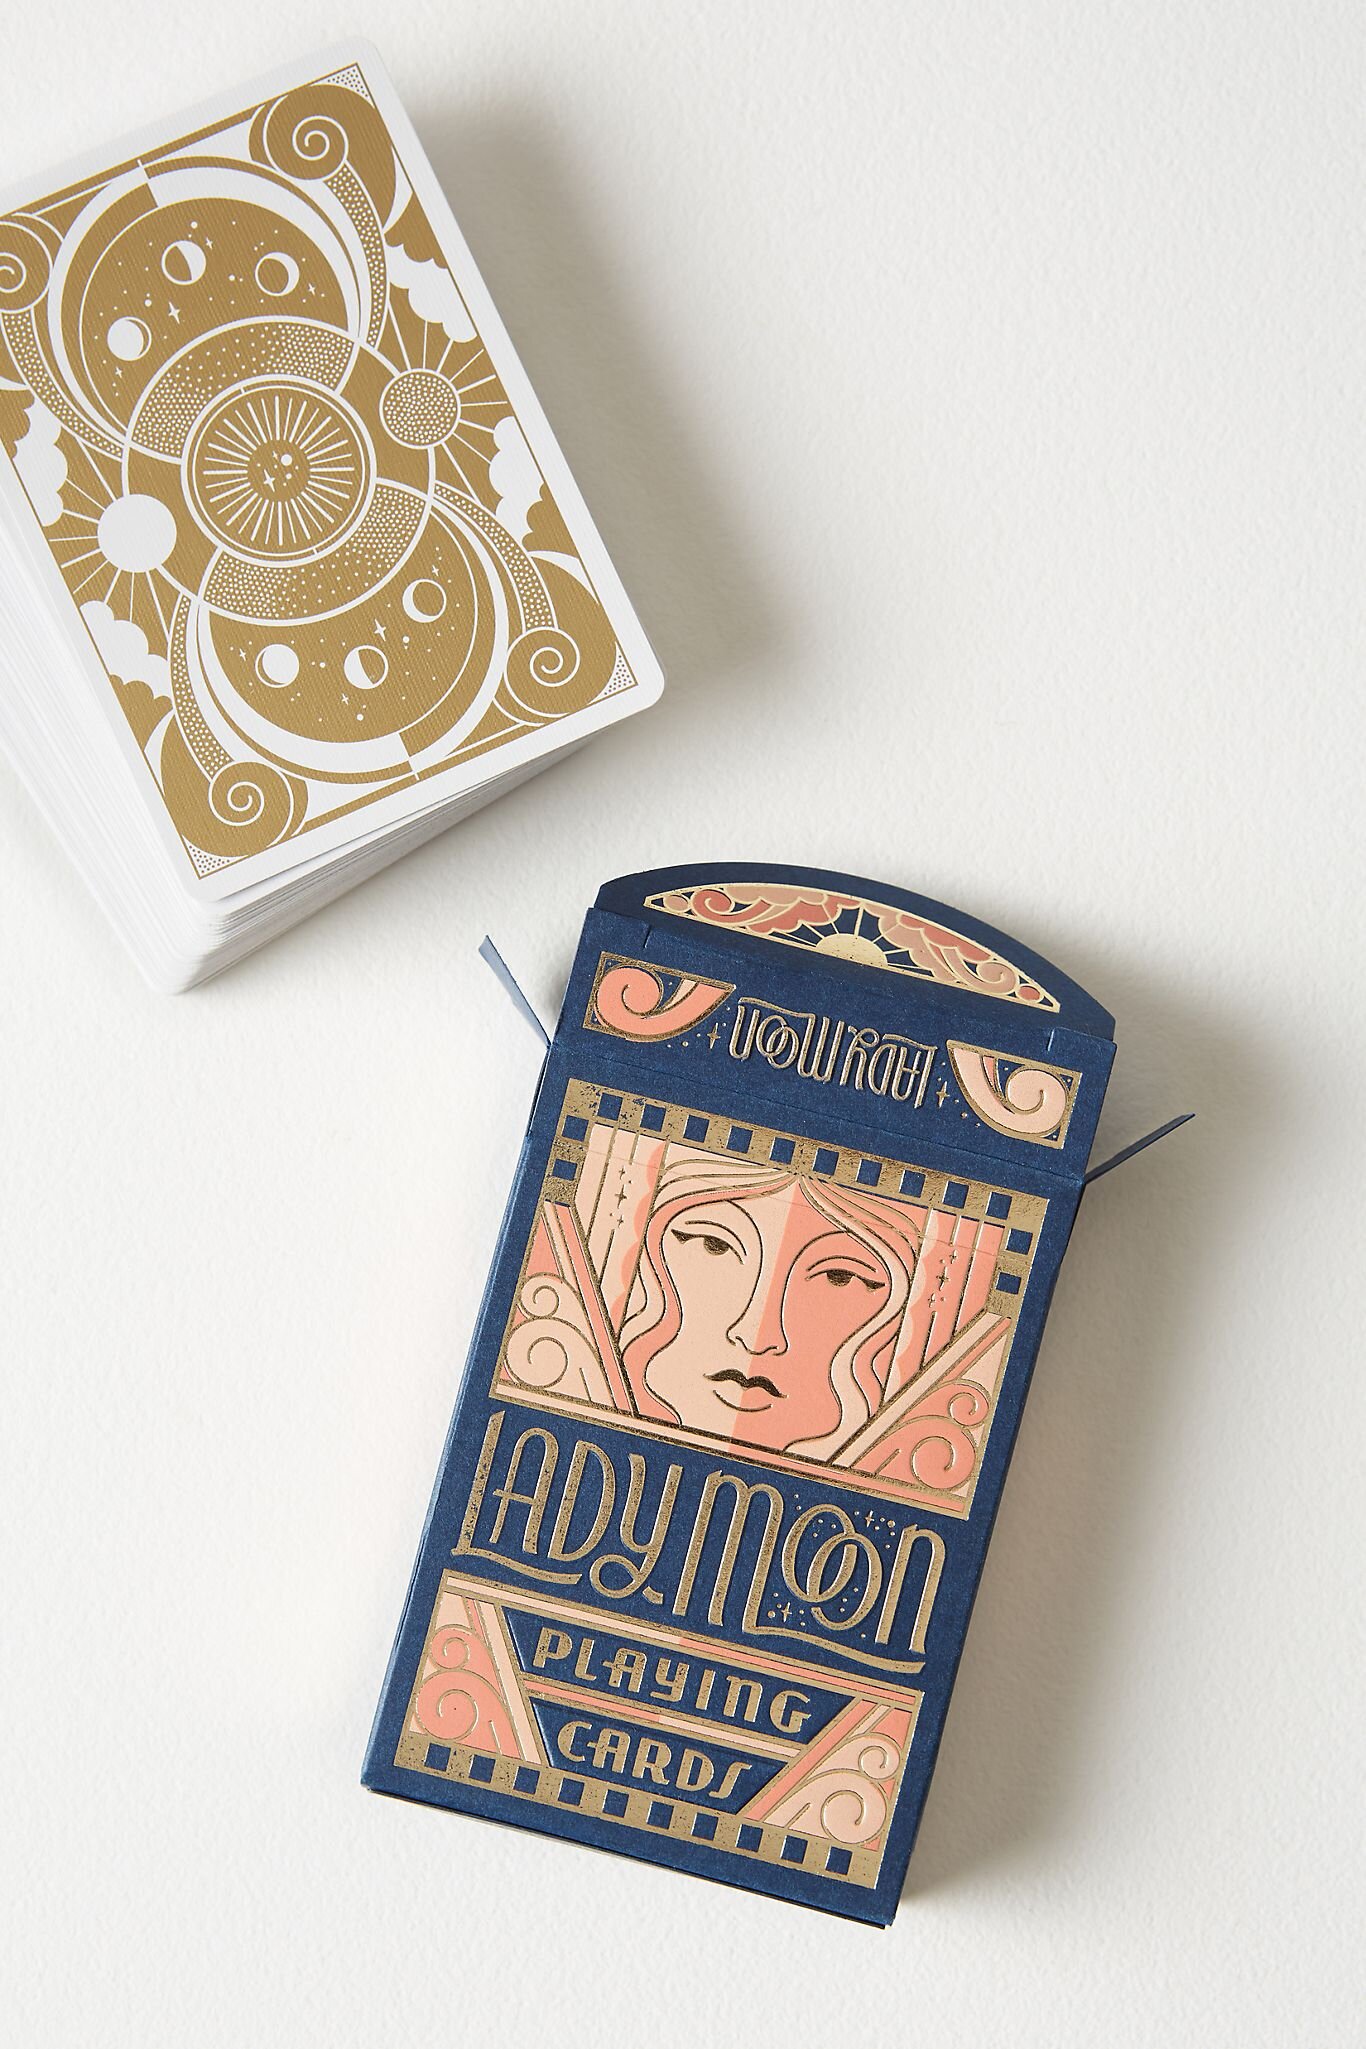 Lady Moon Playing Cards.jpg